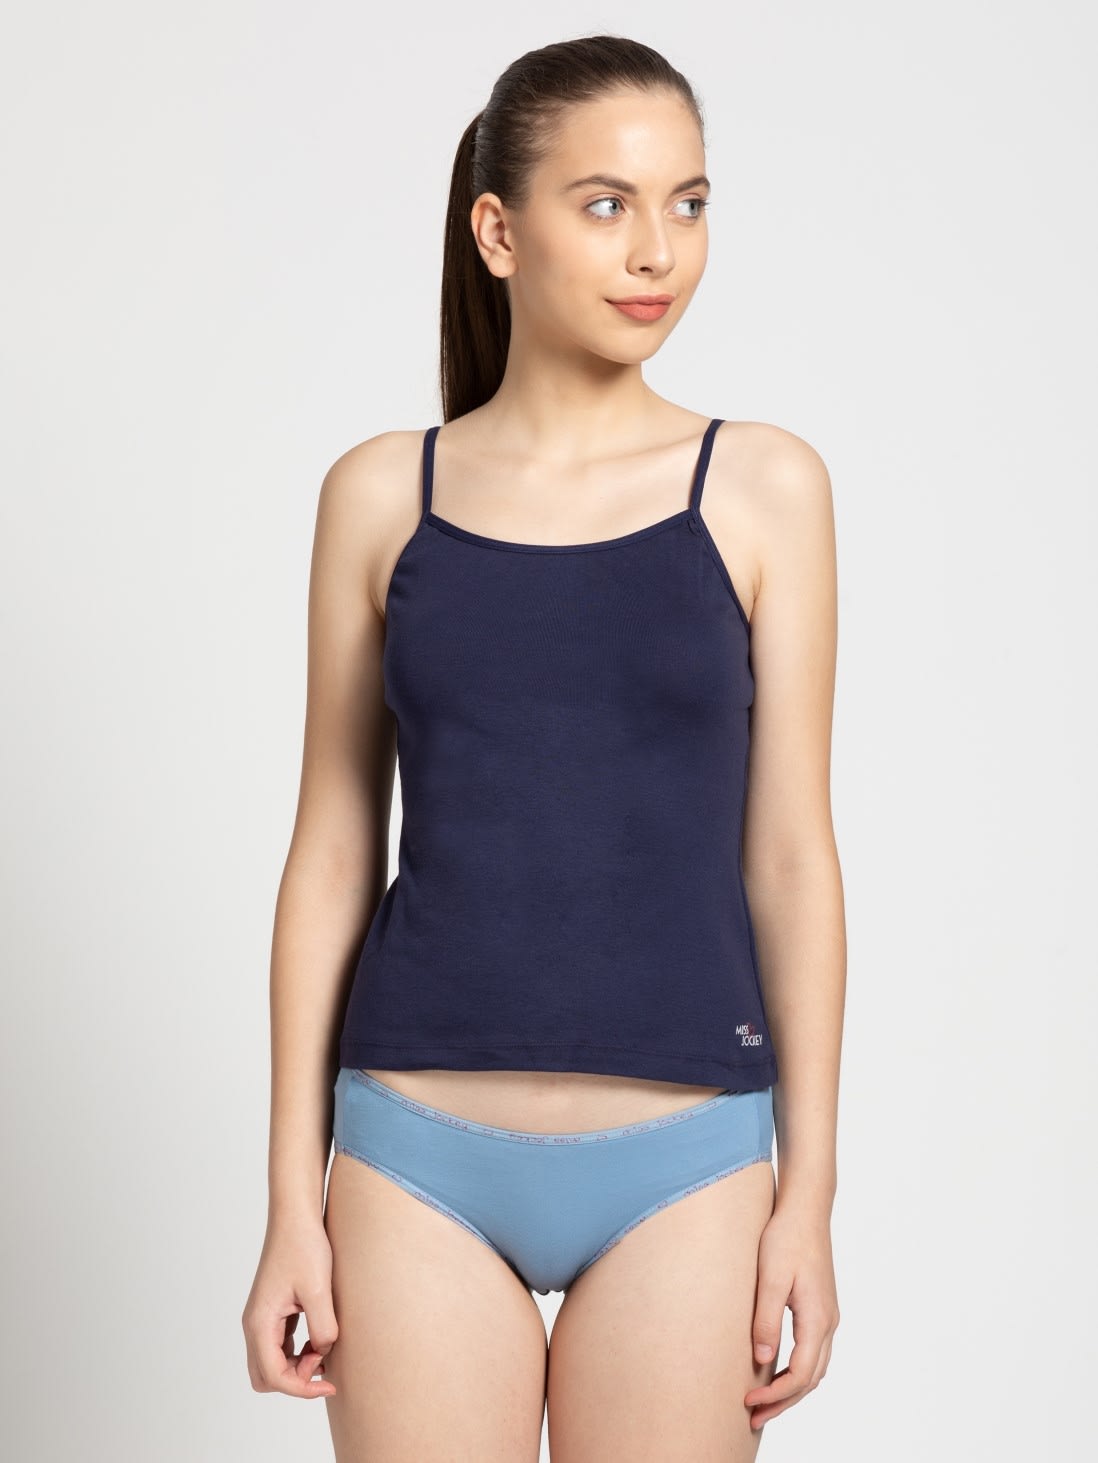 womens navy camisole